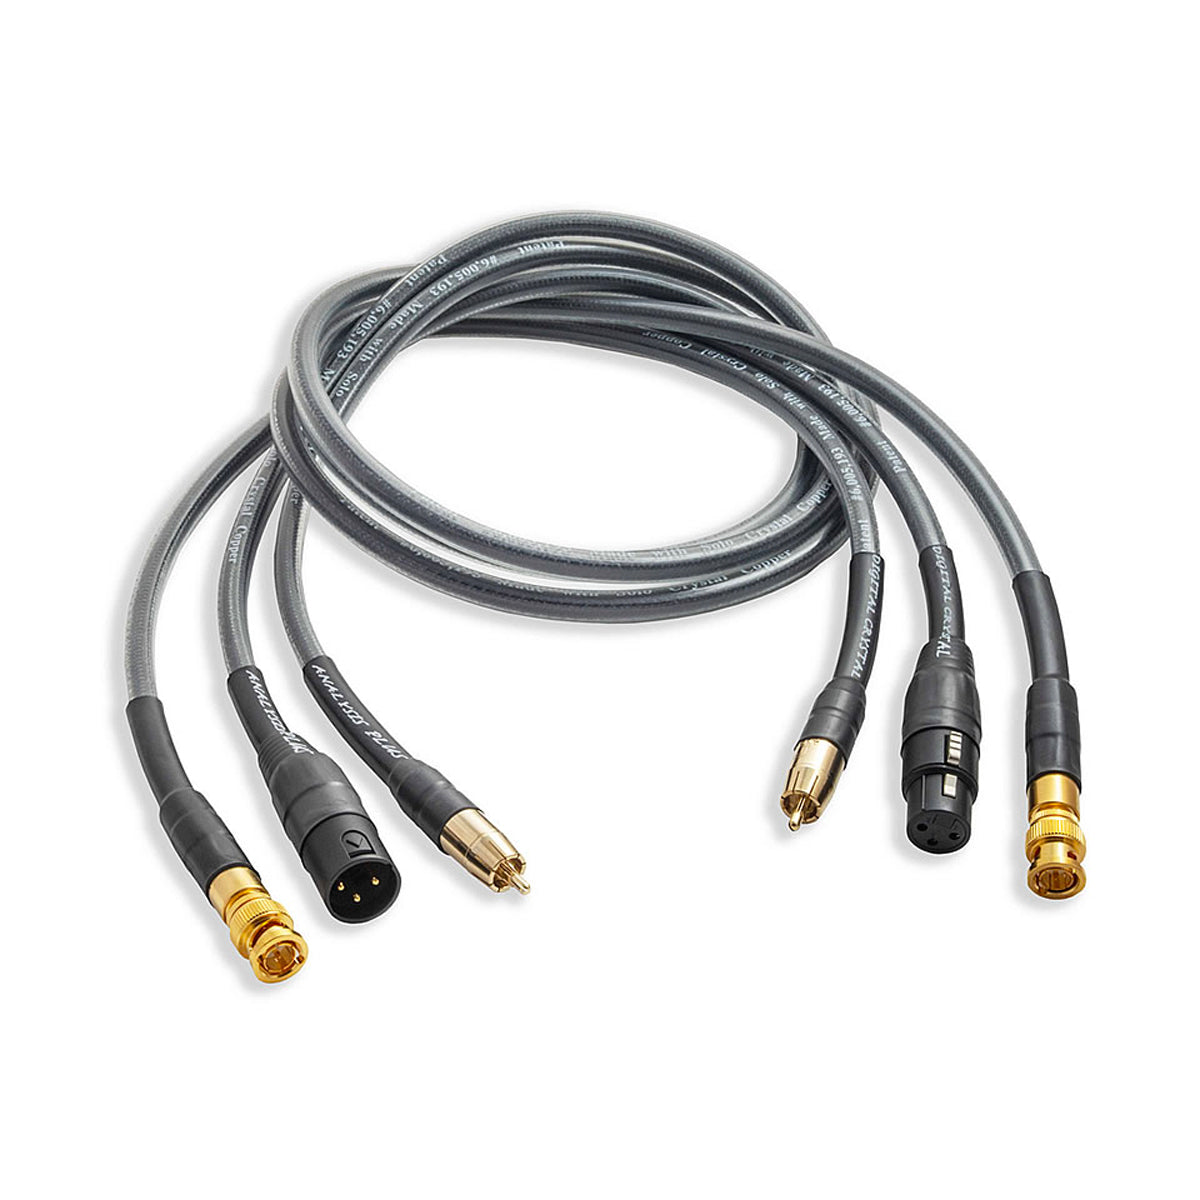 Analysis Plus Digital Crystal Cable - The Audio Experts